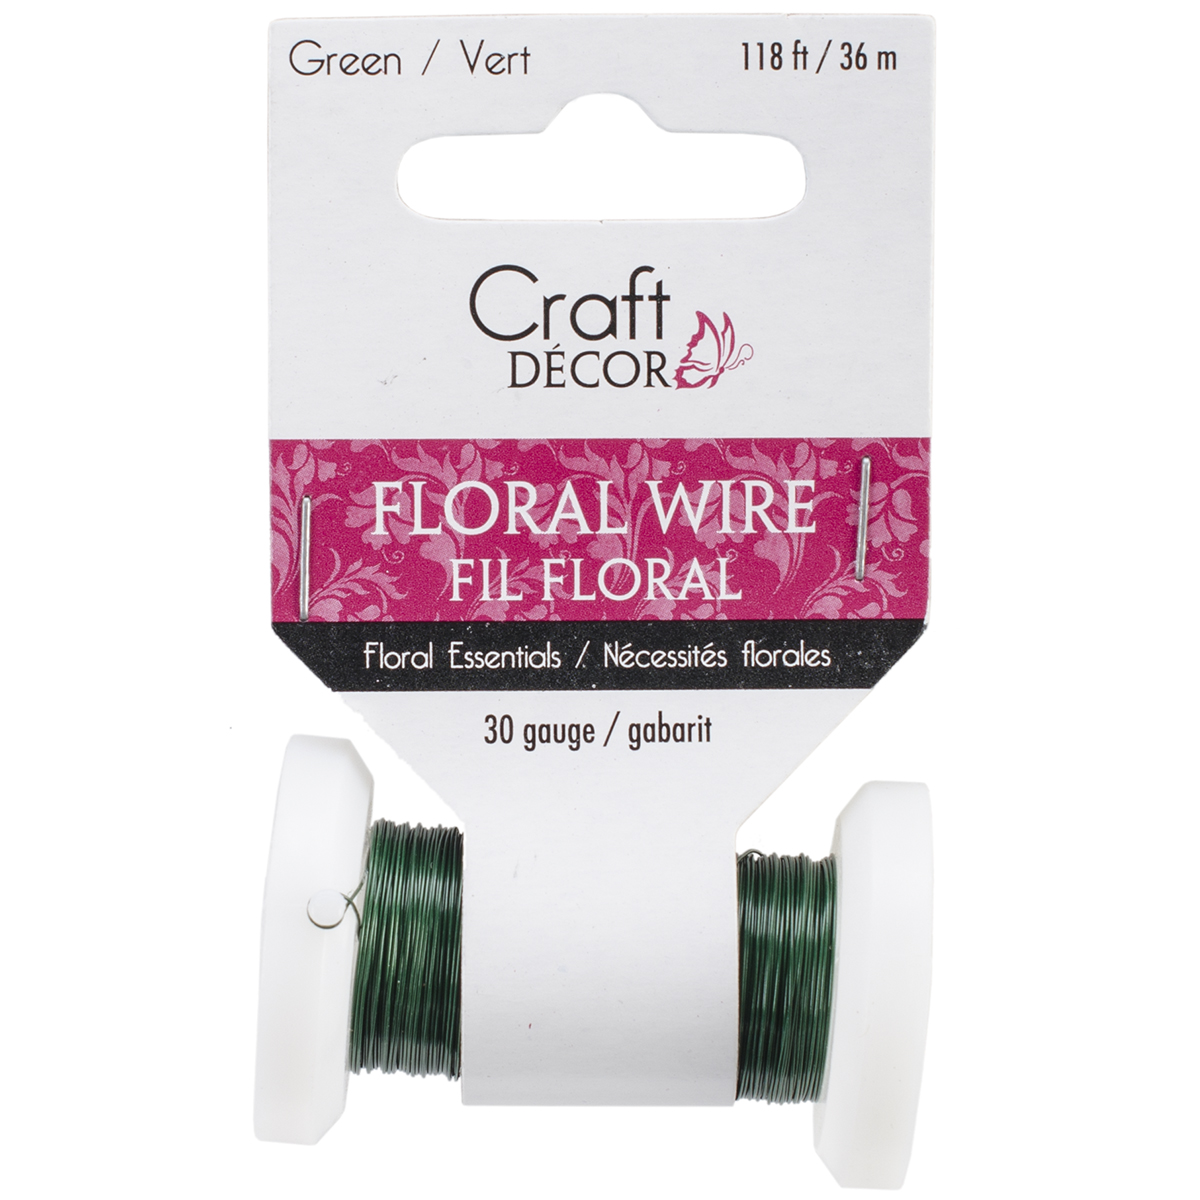 Spooled Floral Wire 30 Gauge 118' - Green - image 1 of 2